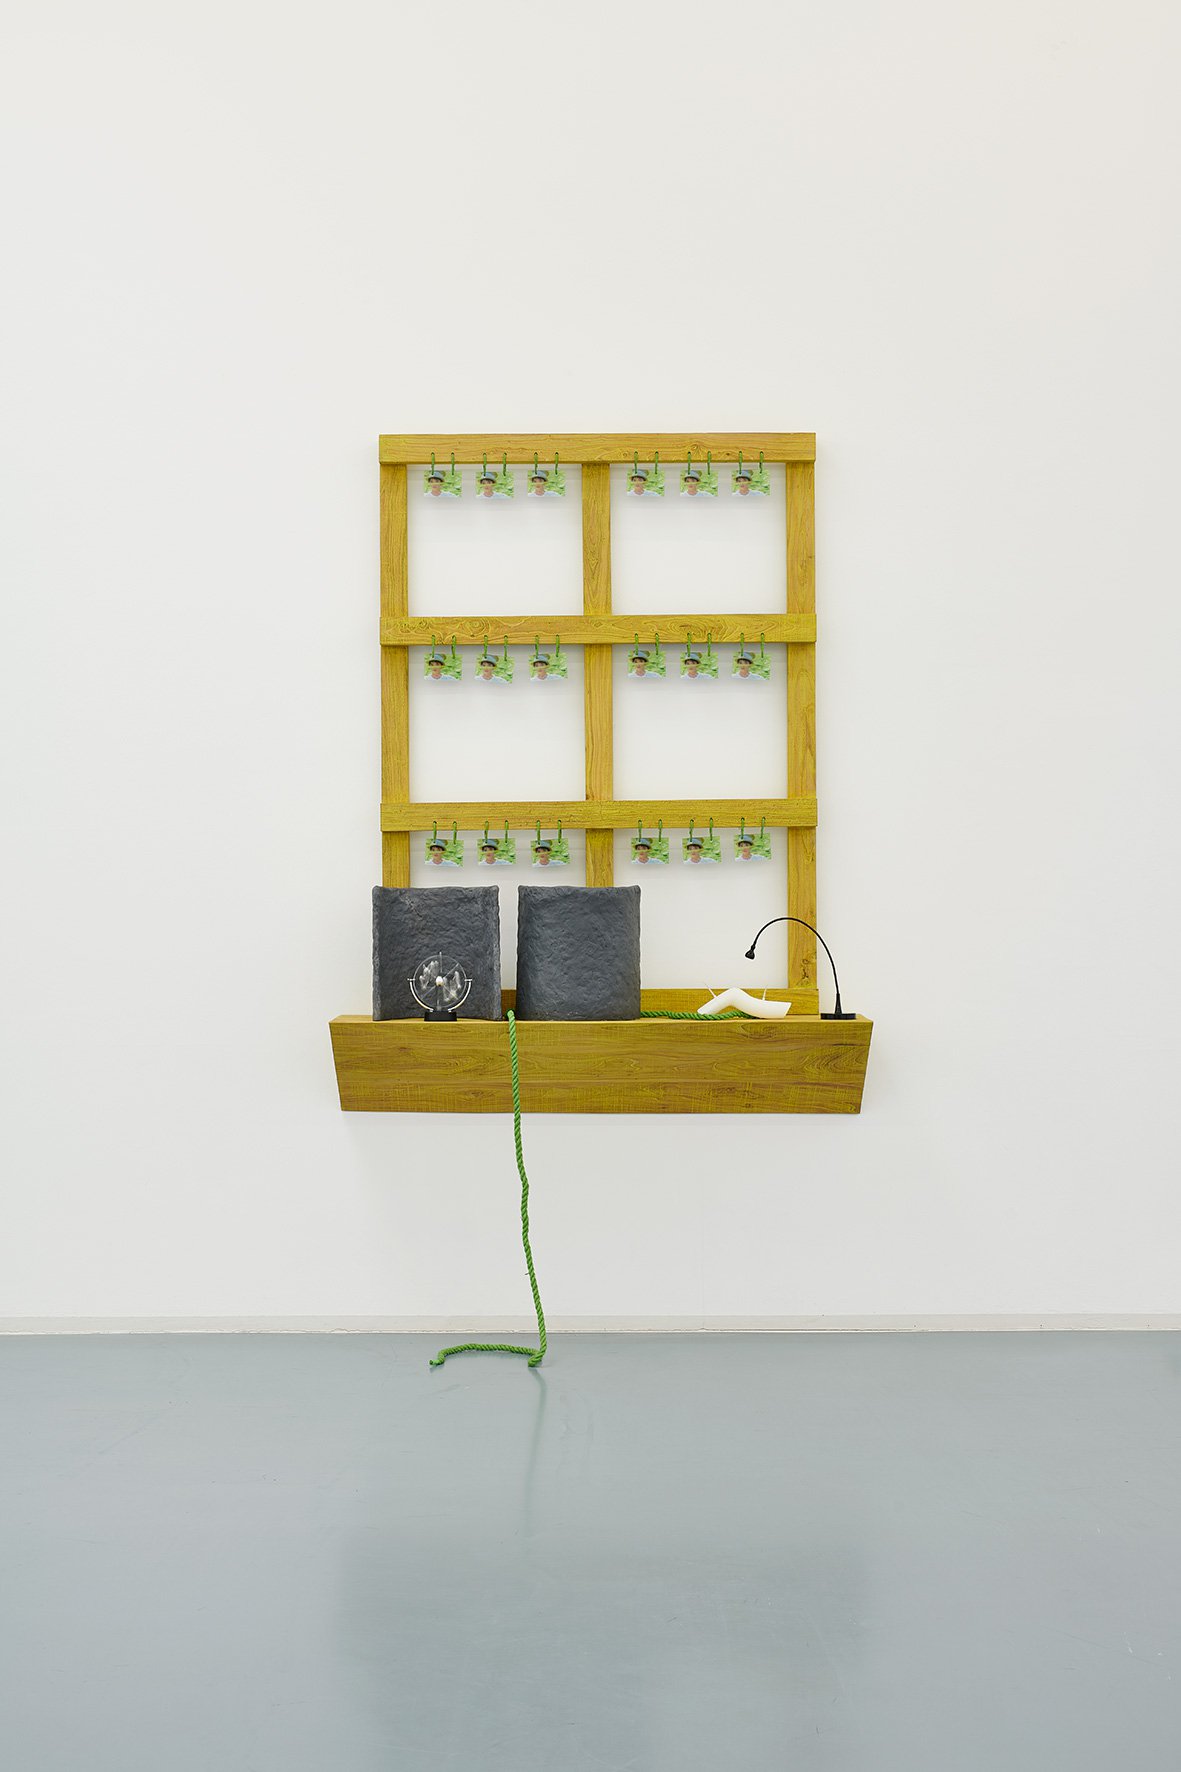 Guan Xiao, Products Farming, installation view, 2019, Bonner Kunstverein. Courtesy the artist, Antenna Space, Shanghai and Kraupa-Tuskany Zeidler, Berlin. Photo: Mareike Tocha.